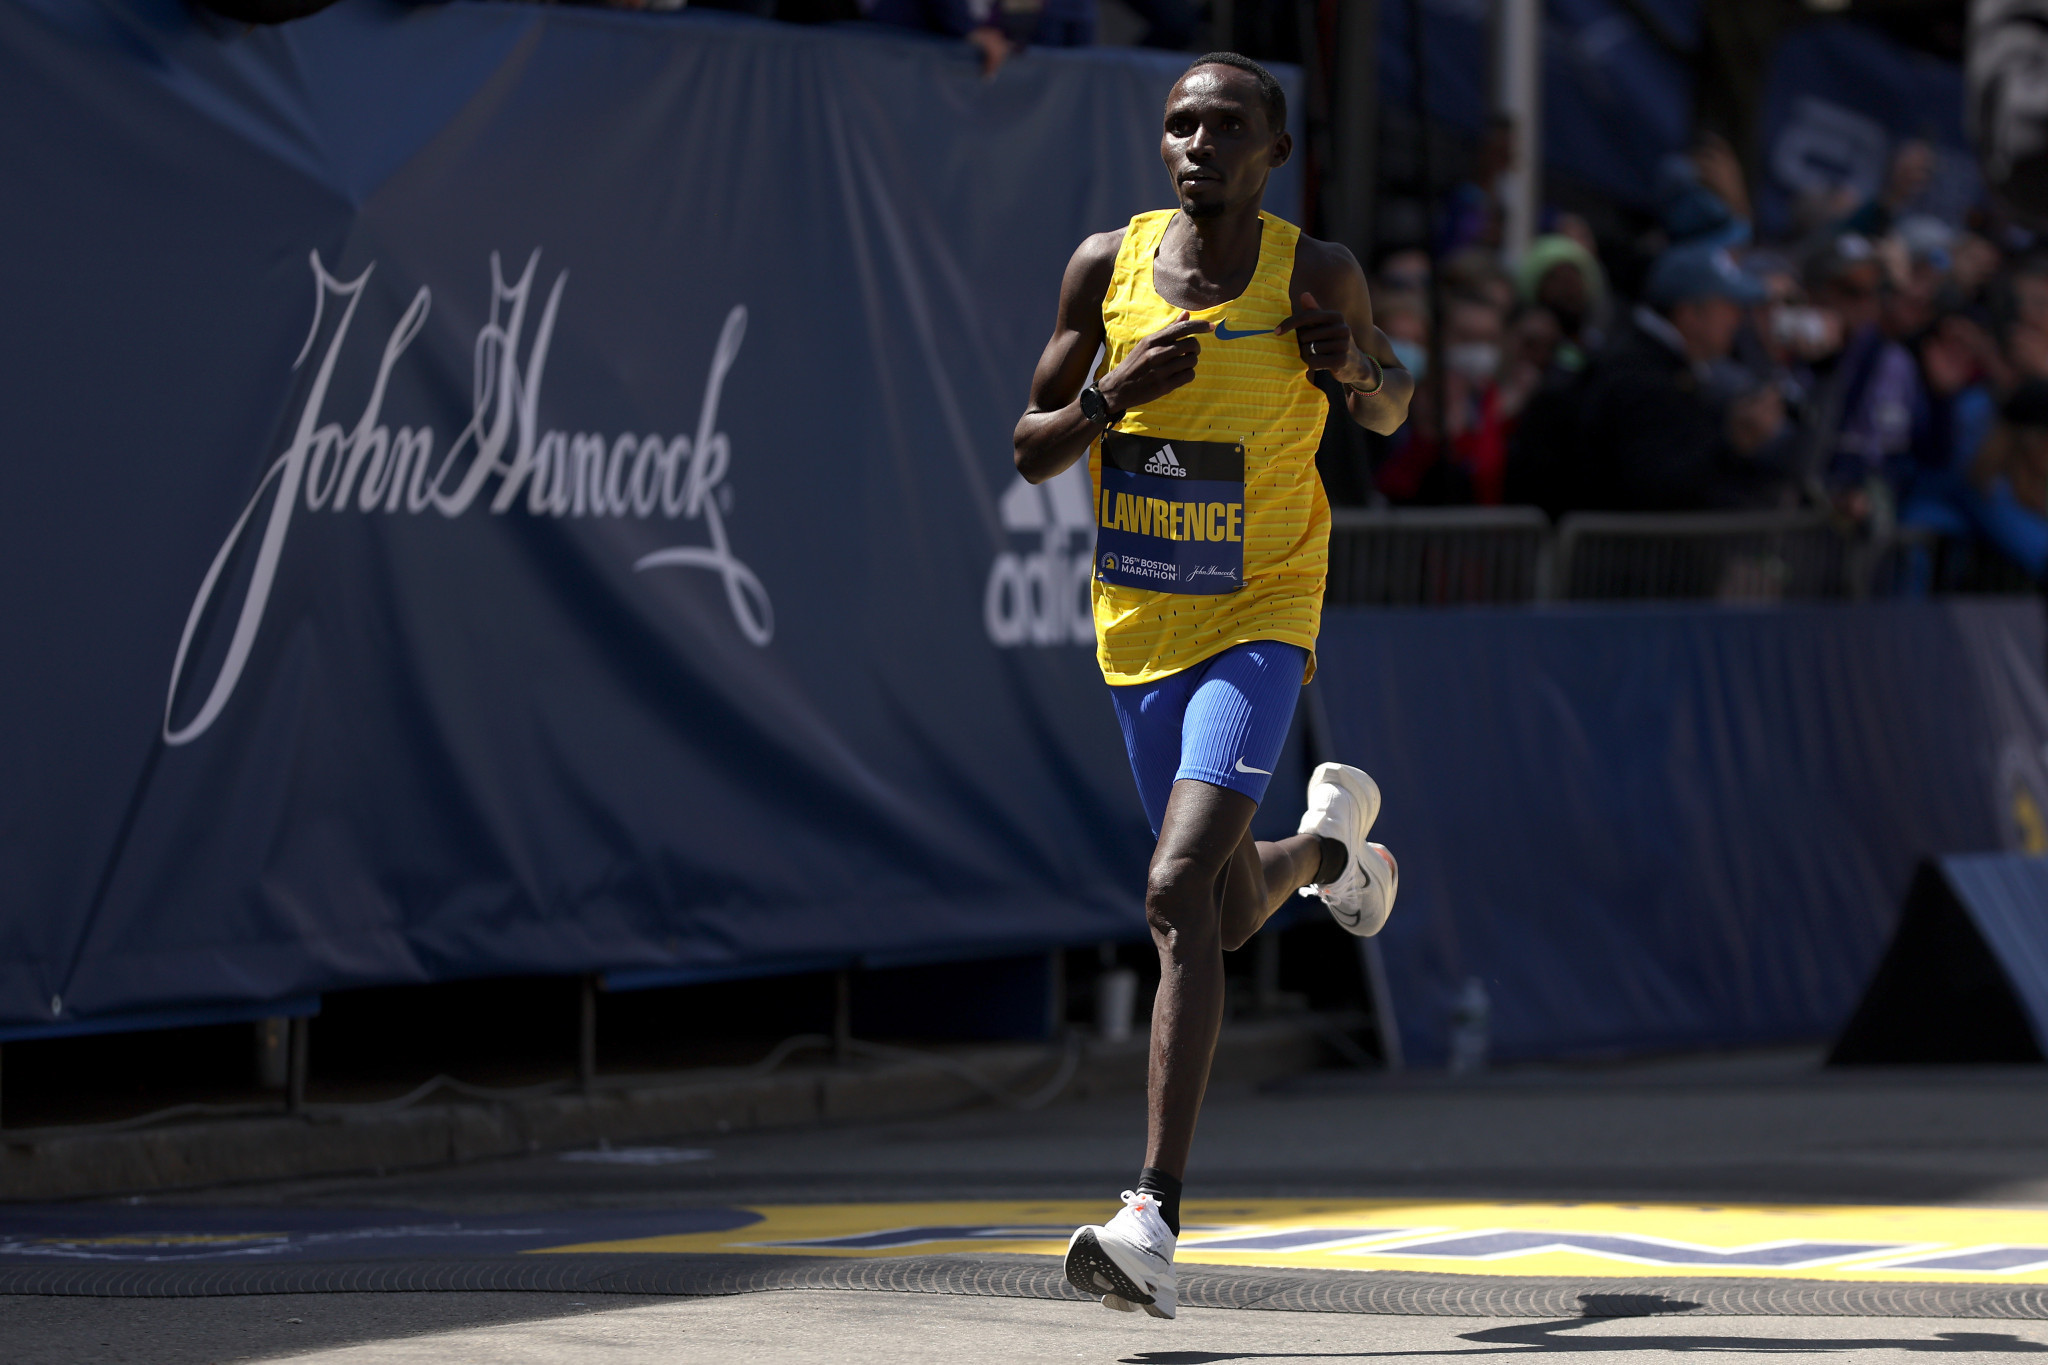 Lawrence Cherono, the 2019 Boston Marathon champion, is among at least 55 Kenyan athletes currently serving doping suspensions, which has raised fears of a blanket ban by World Athletics ©Getty Images